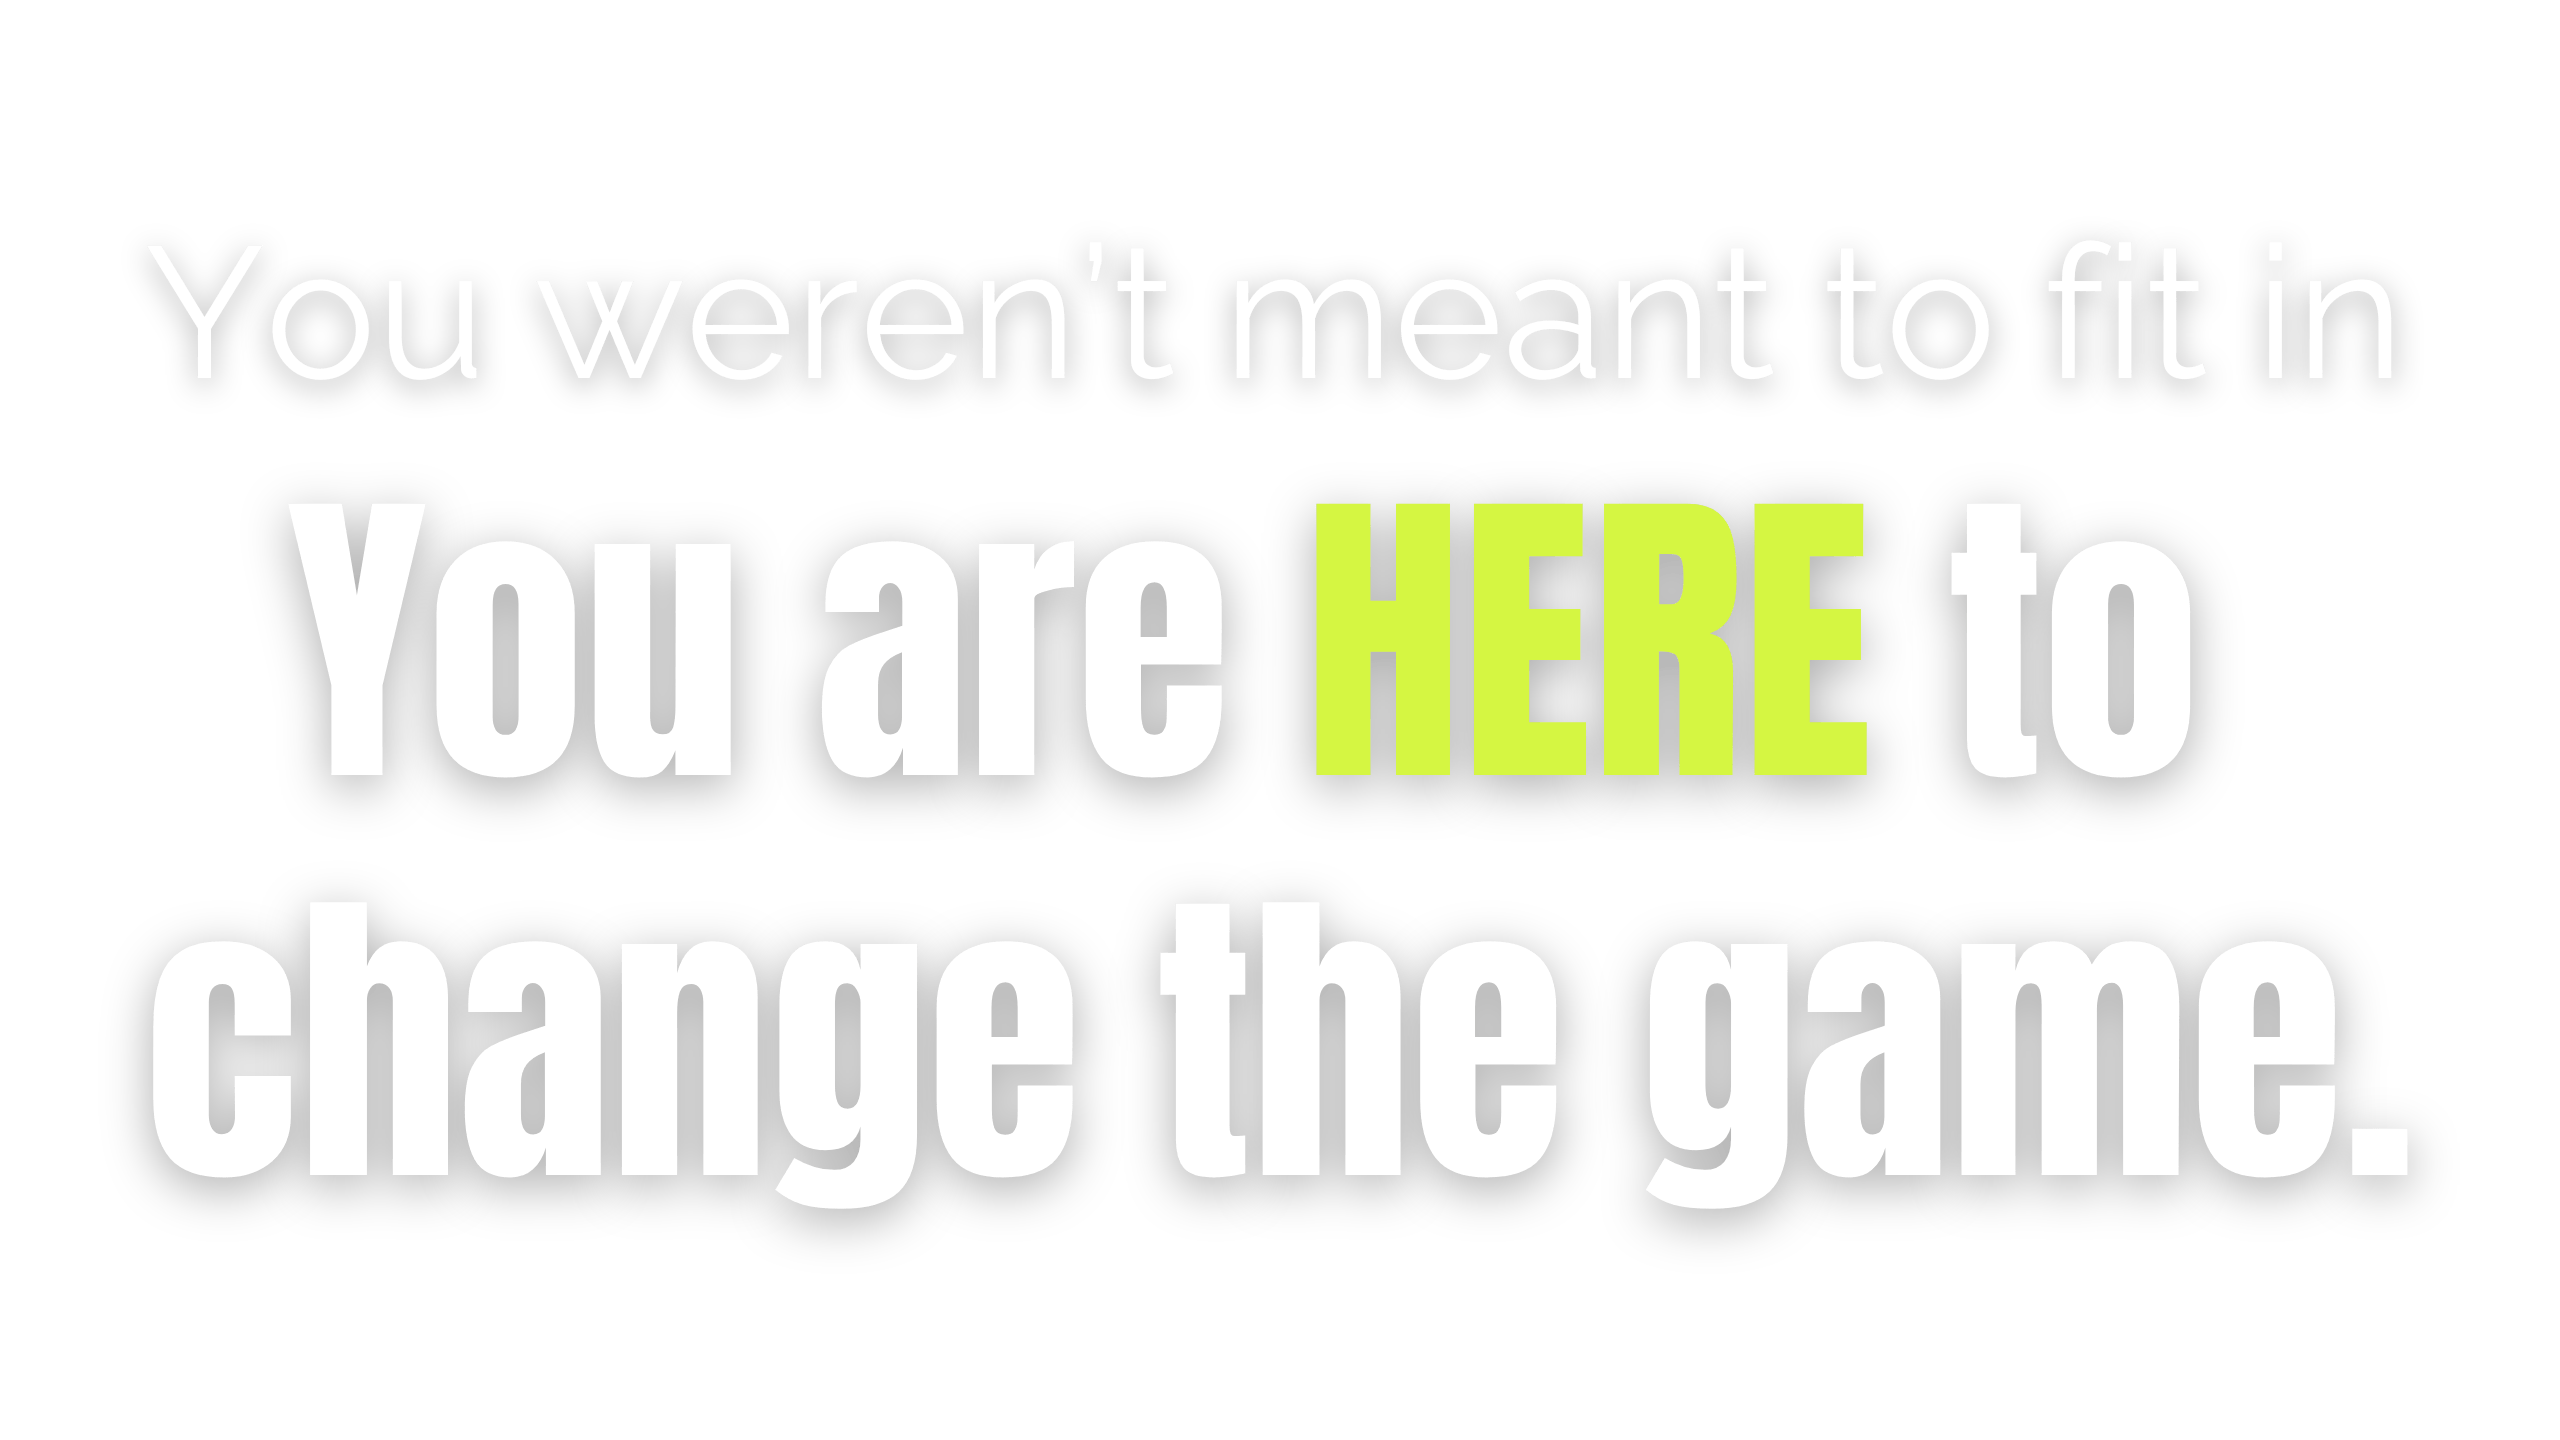 You are here to change the game